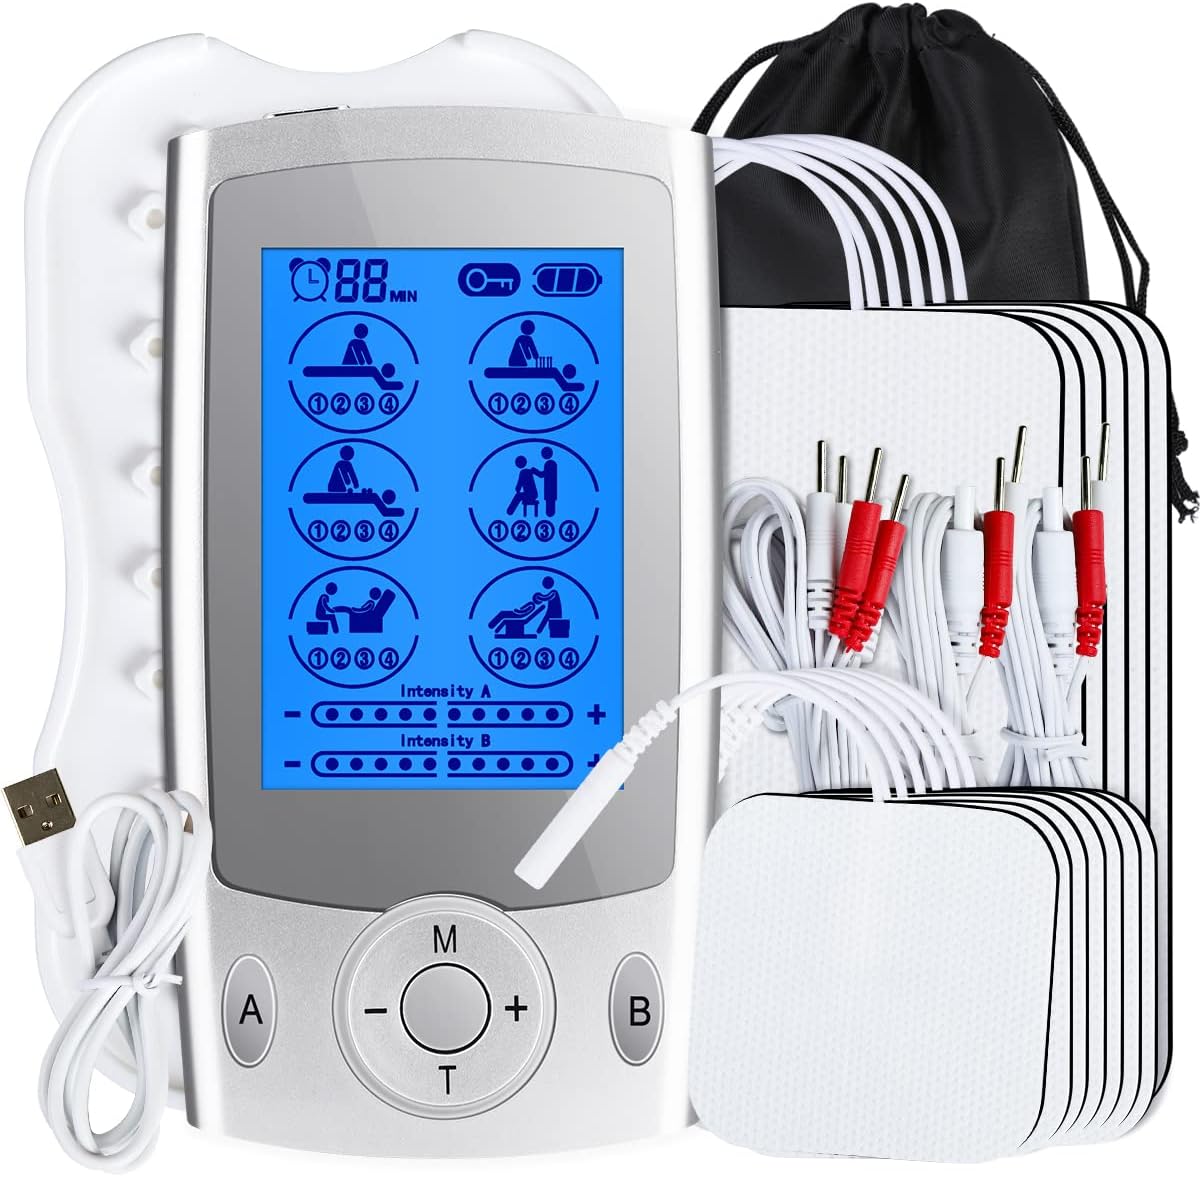 Pocket-sized white TENS unit with a black travel pouch. It comes with a USB charger, small and large reusable electrode pads, and an assortment of cables for the pads.